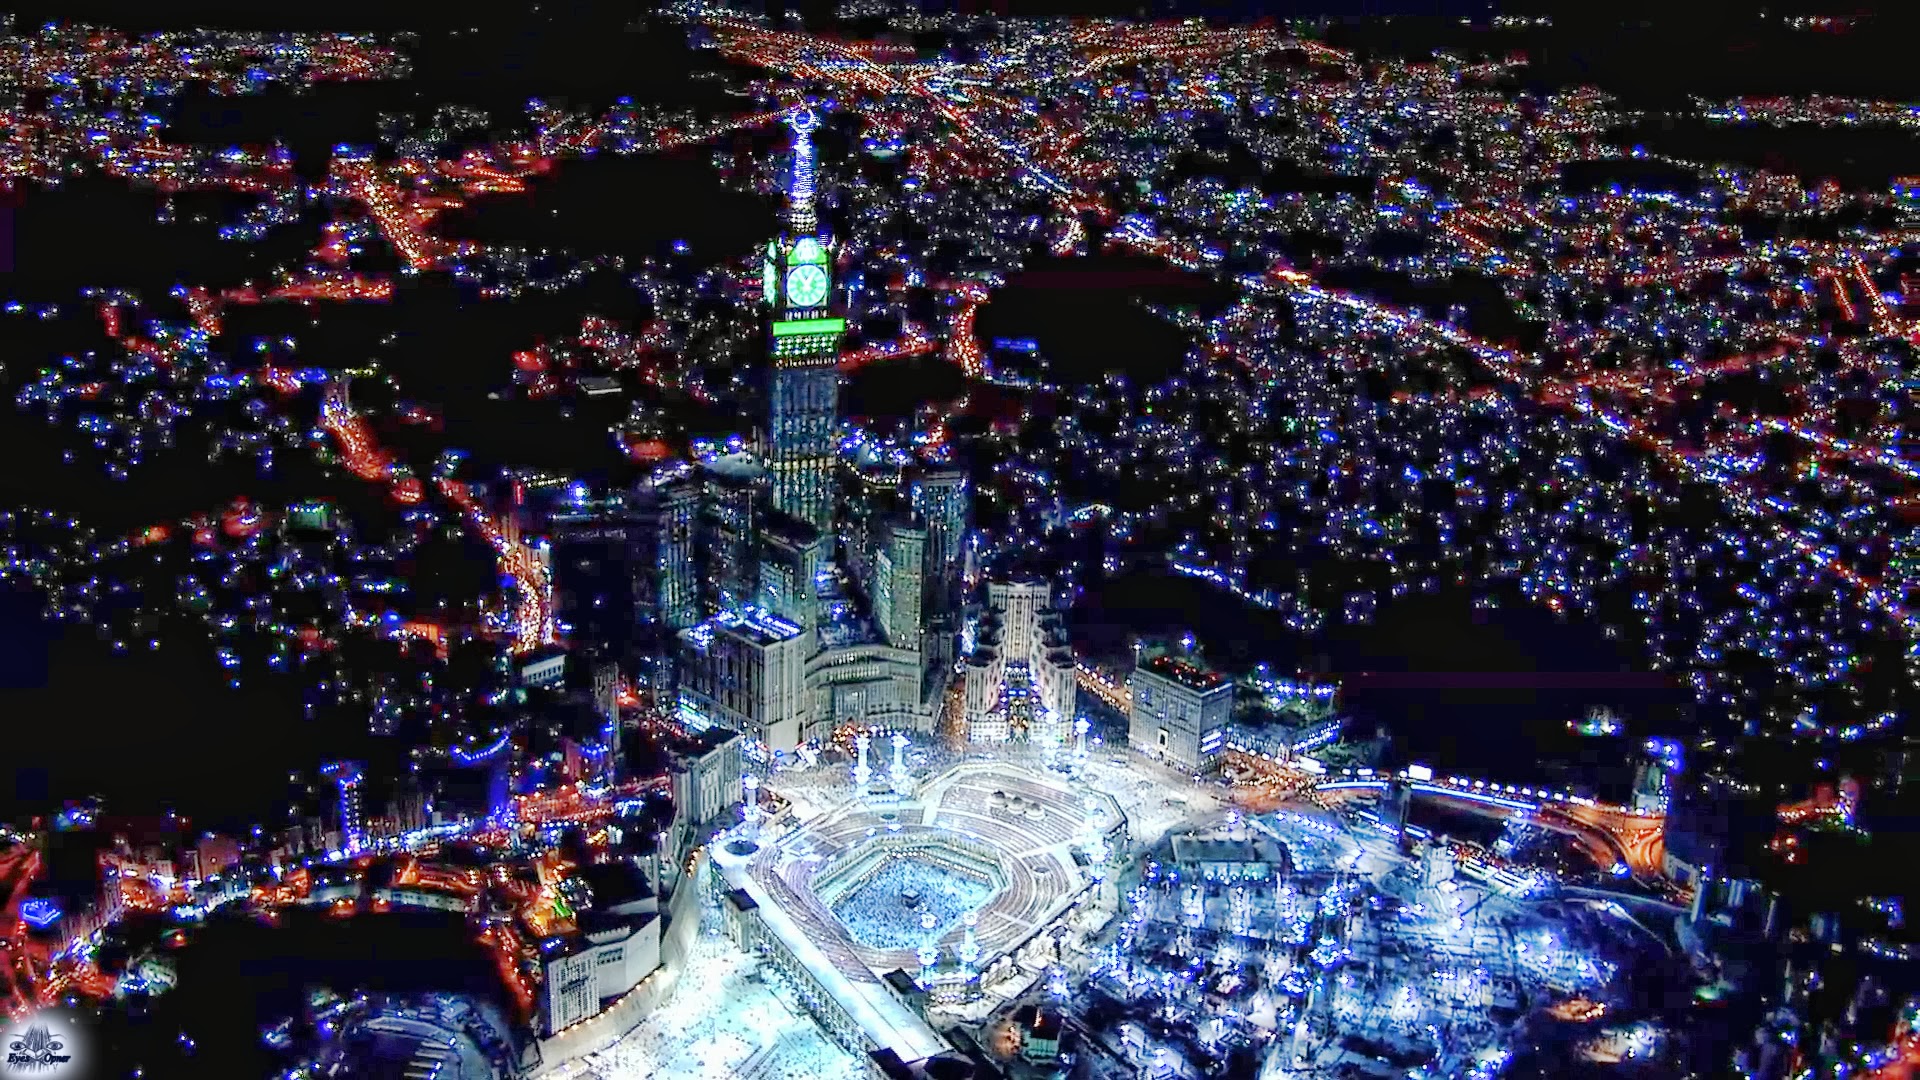  Mecca At Night Desktop Backgrounds for Free HD Wallpaper wall  art